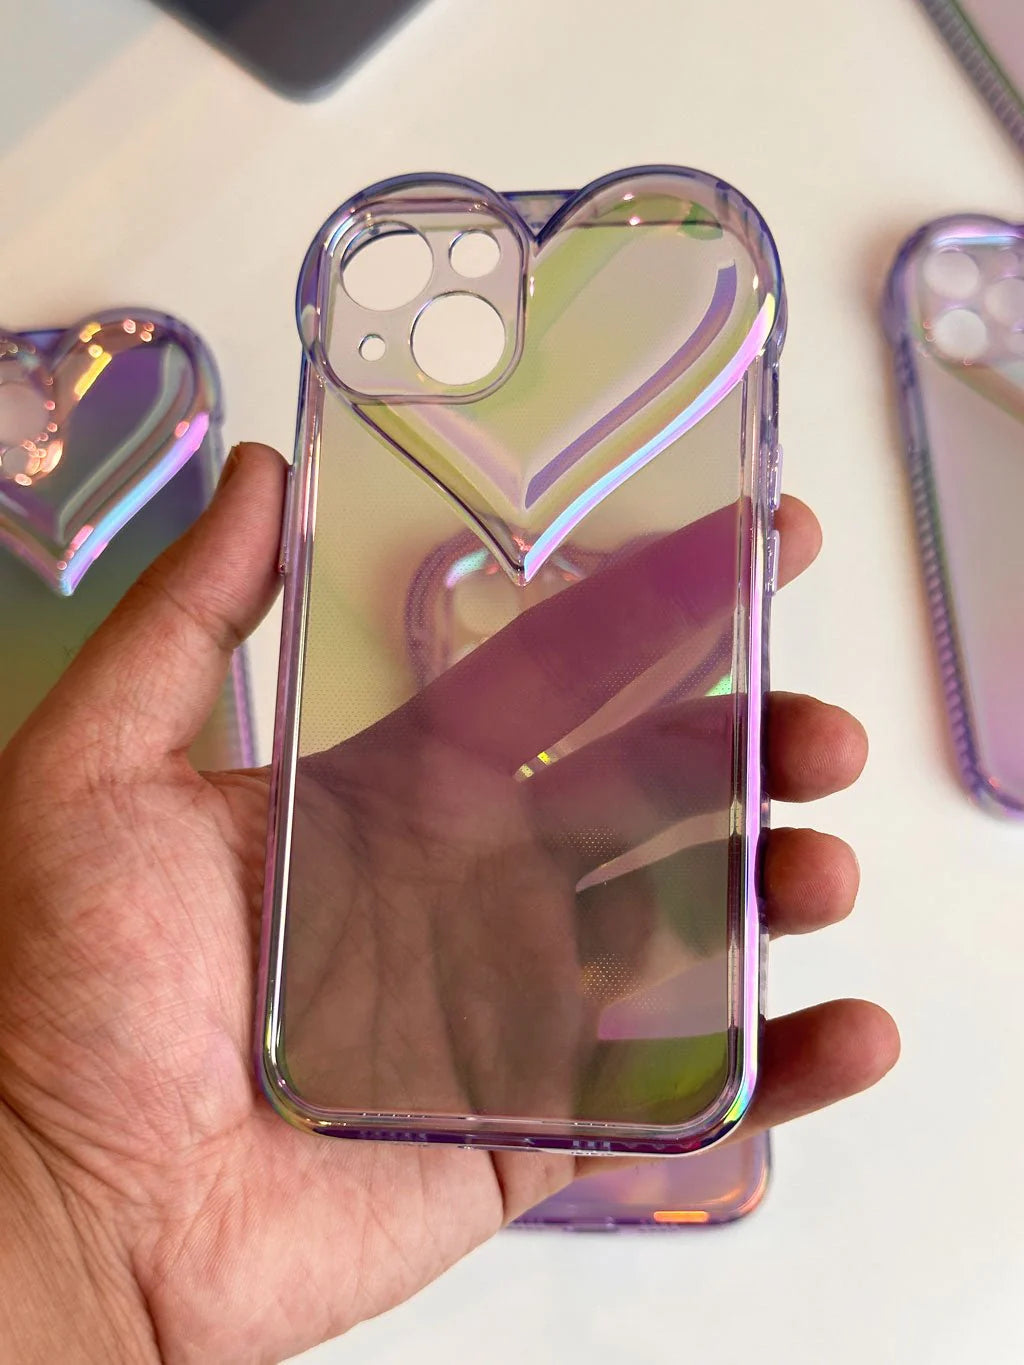 3D Heart Shaped Holographic IPhone Case Cover